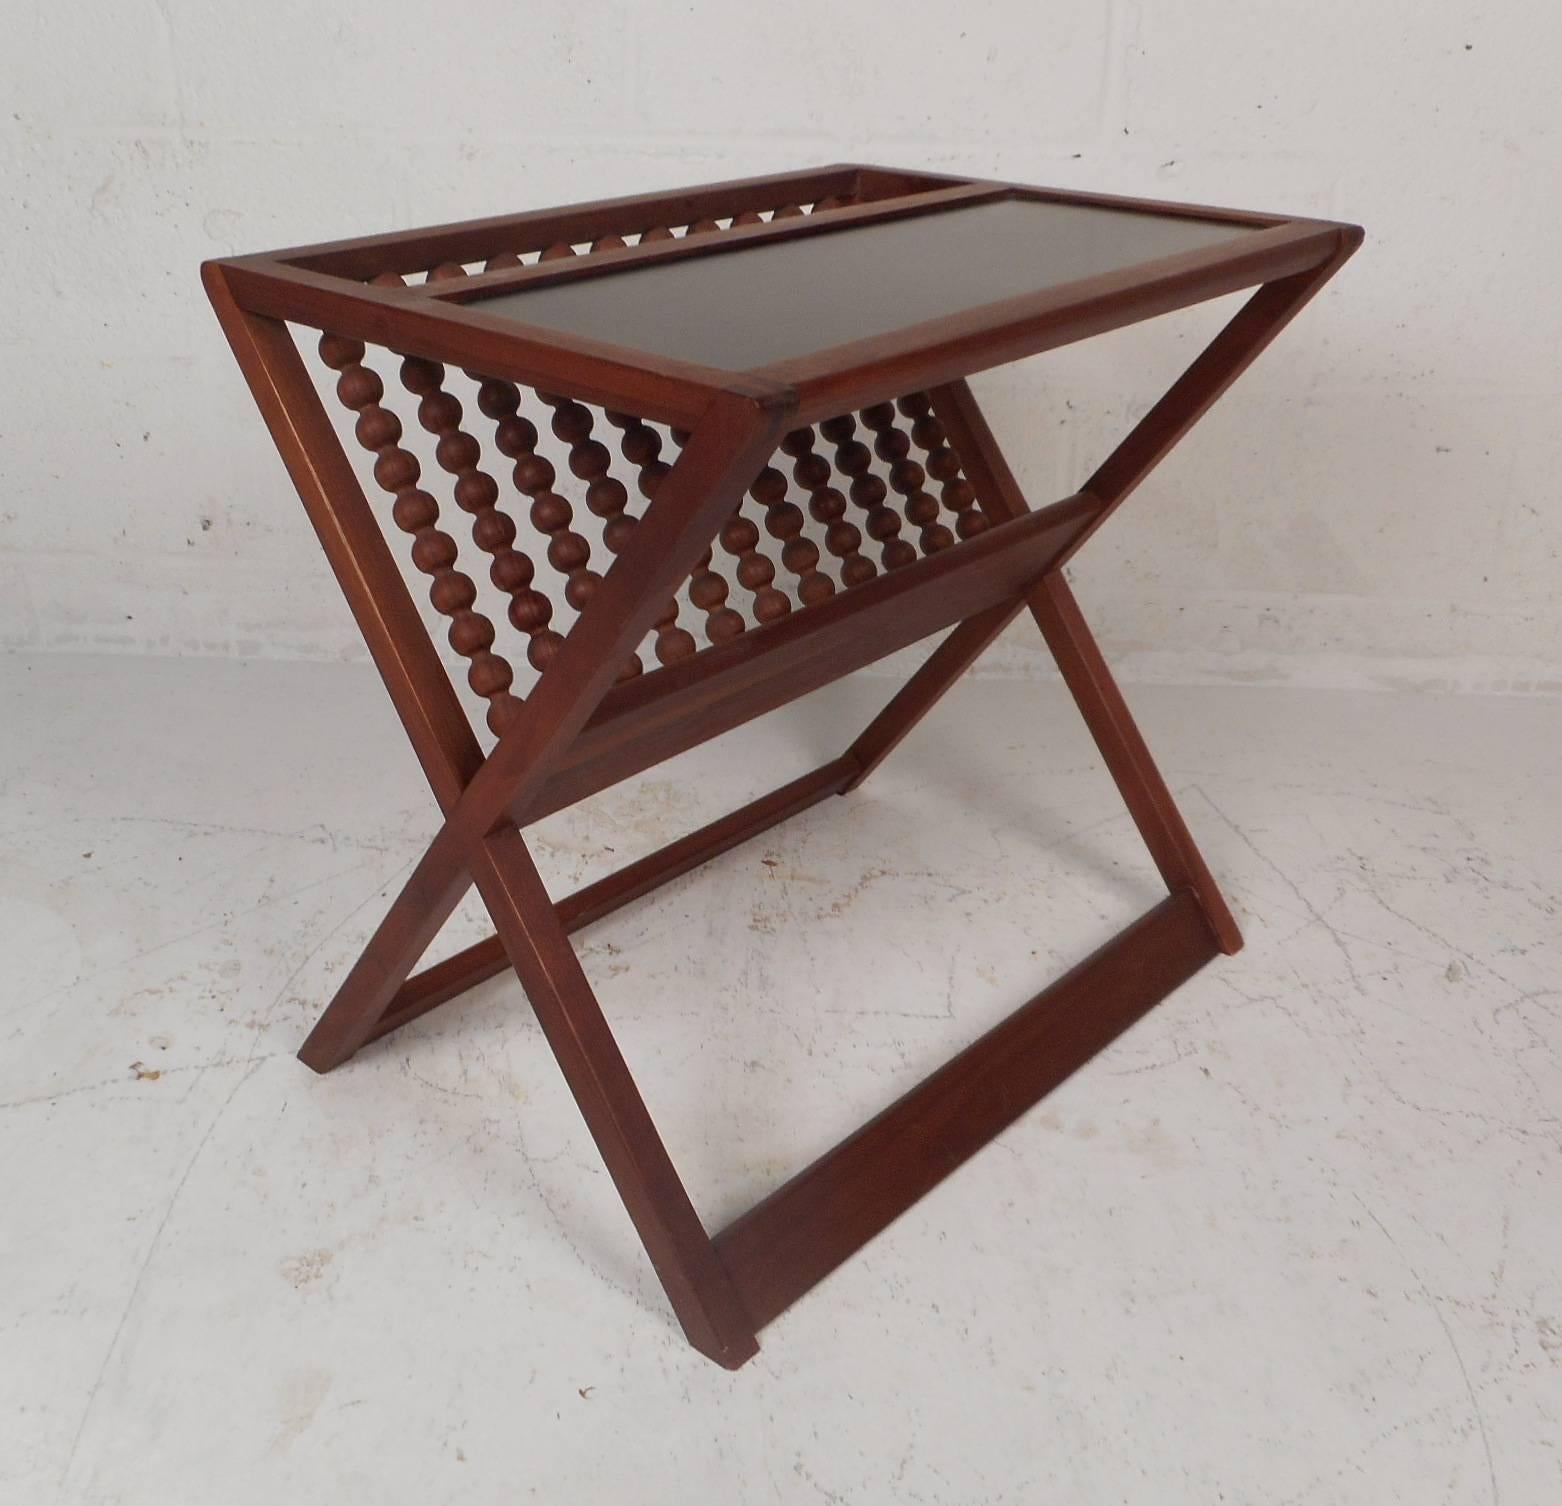 This gorgeous vintage modern magazine rack features a black laminate top allowing it to function as an end table. Unique Piece with a perforated design on one side and sturdy sled legs. This stylish and versatile mid-century piece has "X"